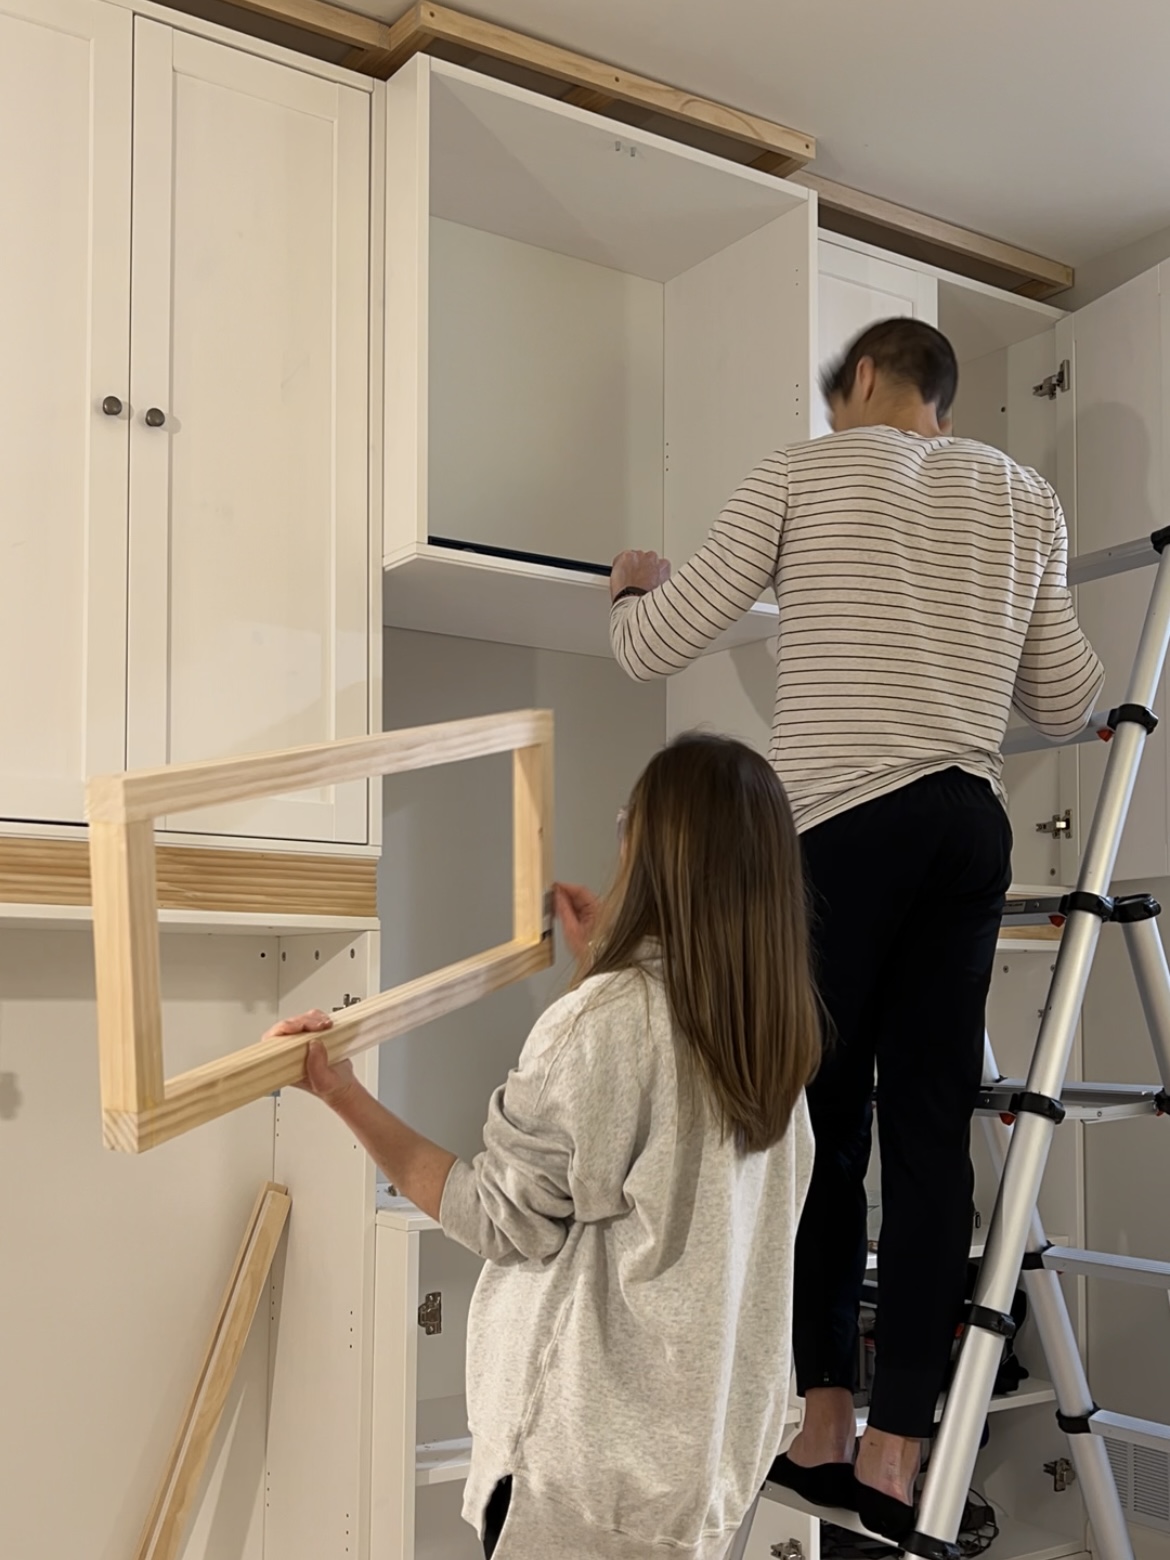 Man and woman leveling and attaching cabinets.